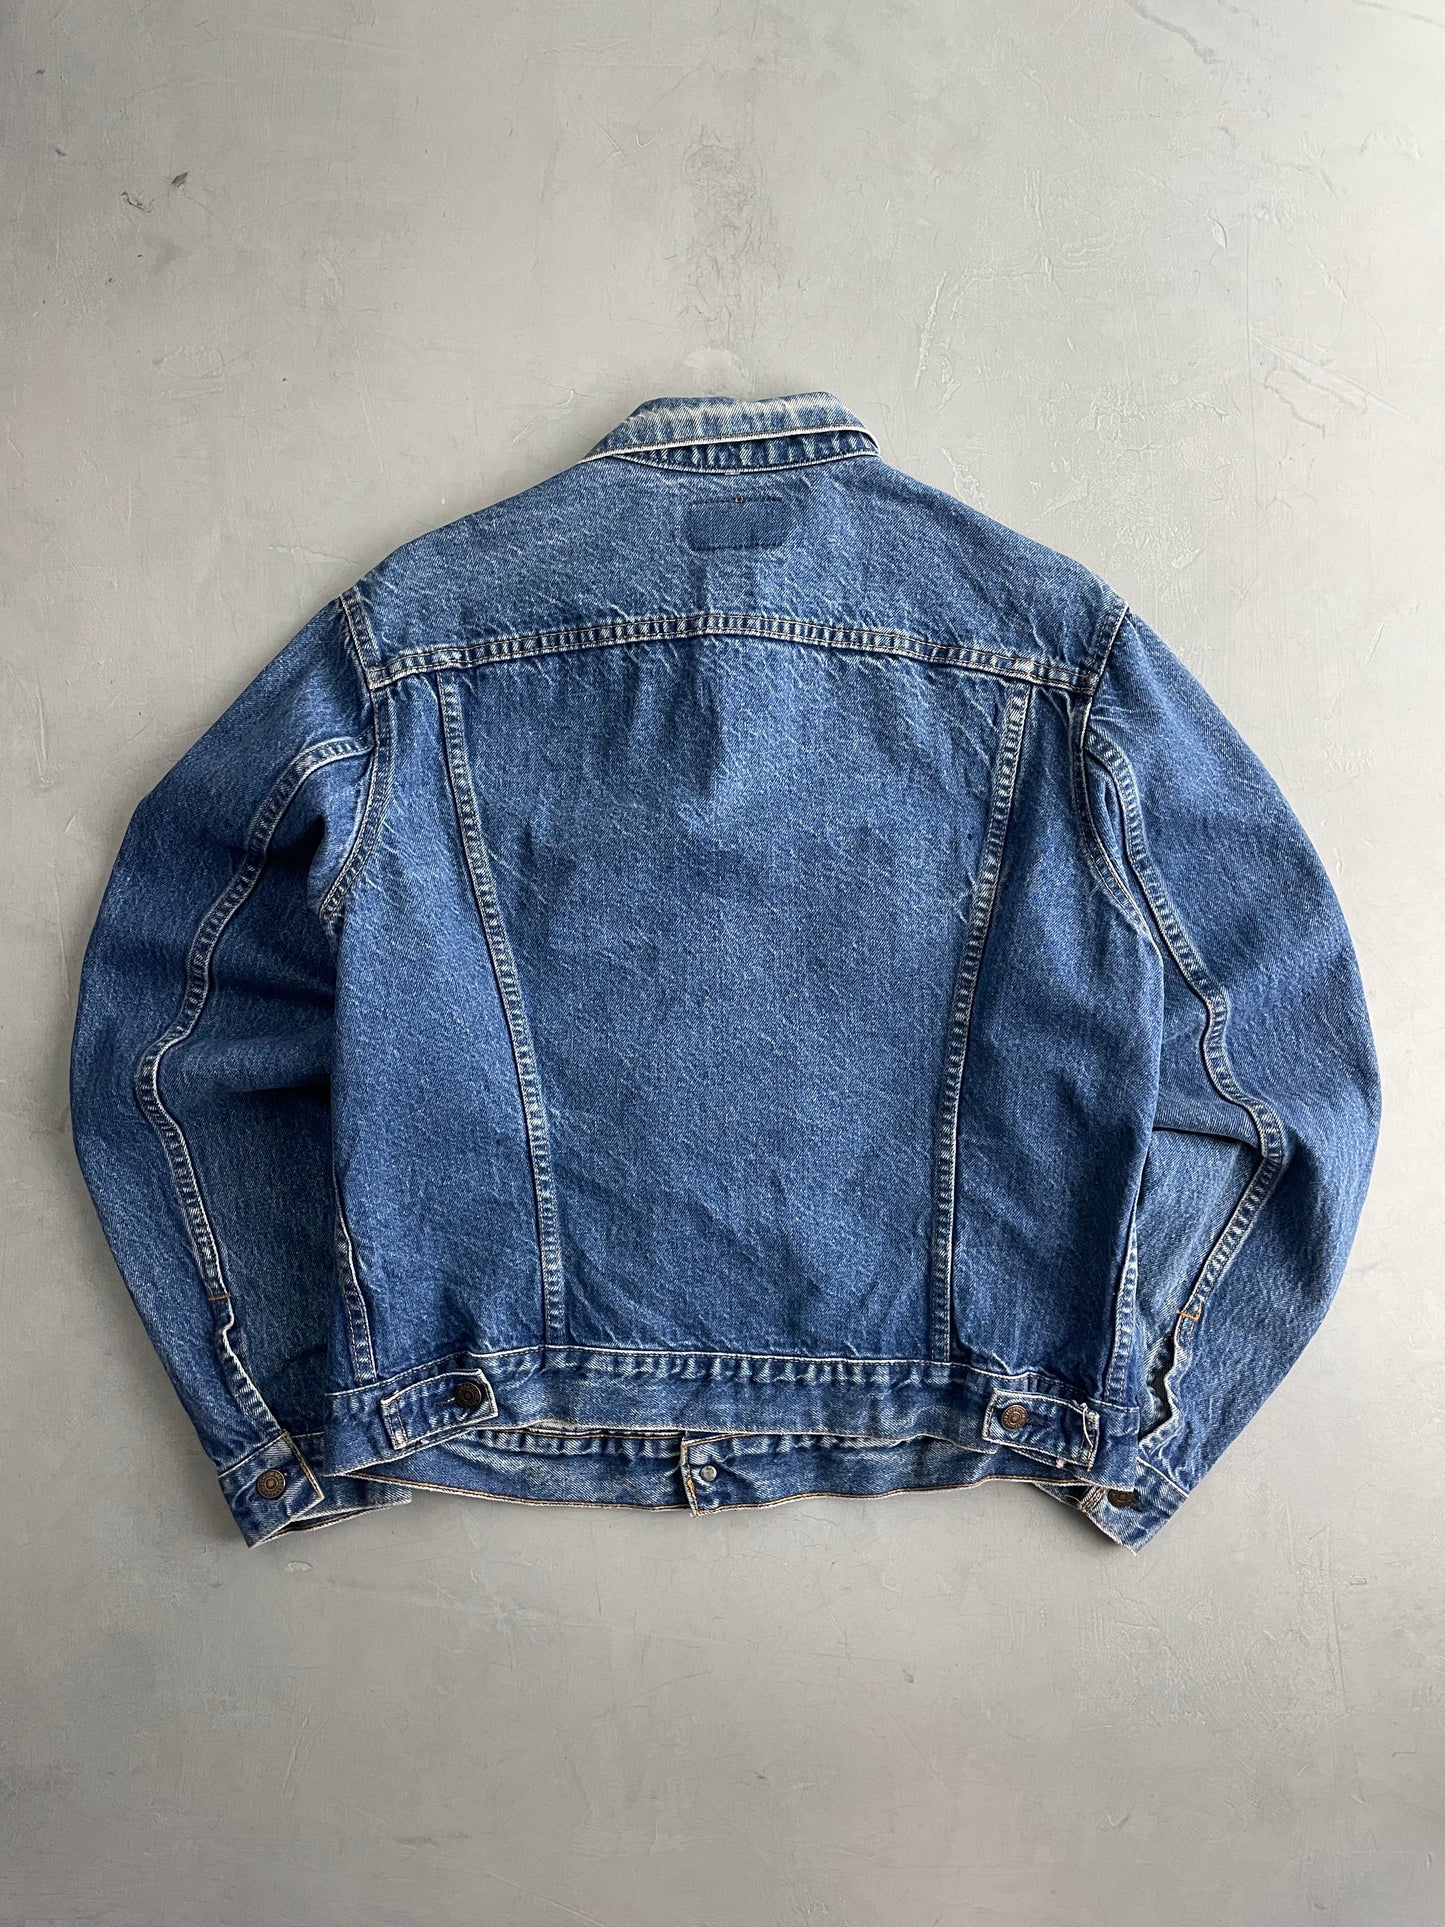 Made in USA Levi's Trucker Jacket [L]